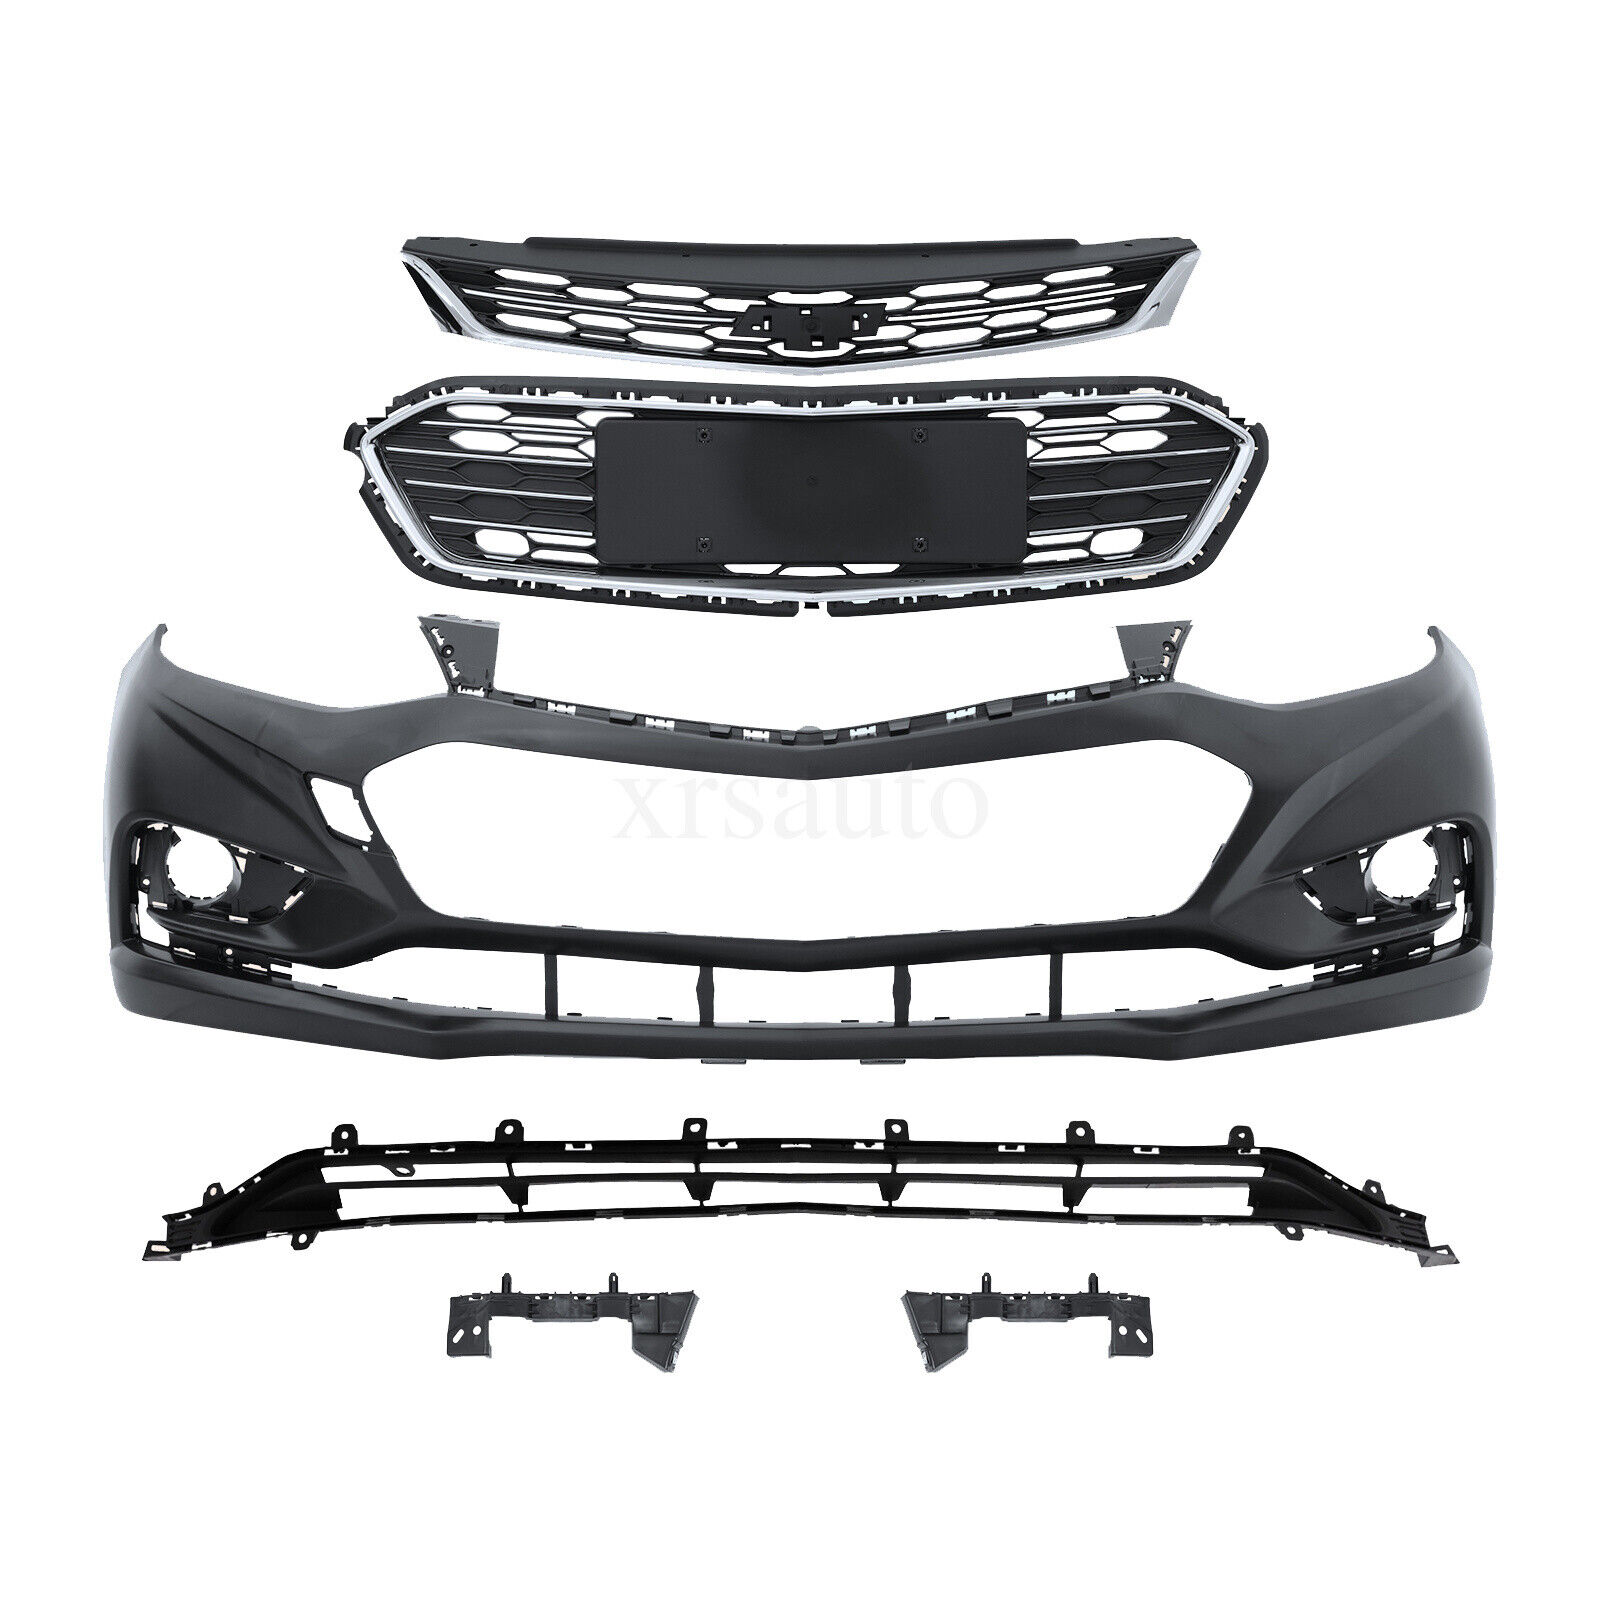 Front Bumper Cover Upper Lower Grille Grill Kit For 2016 2017 2018 Chevy Cruze